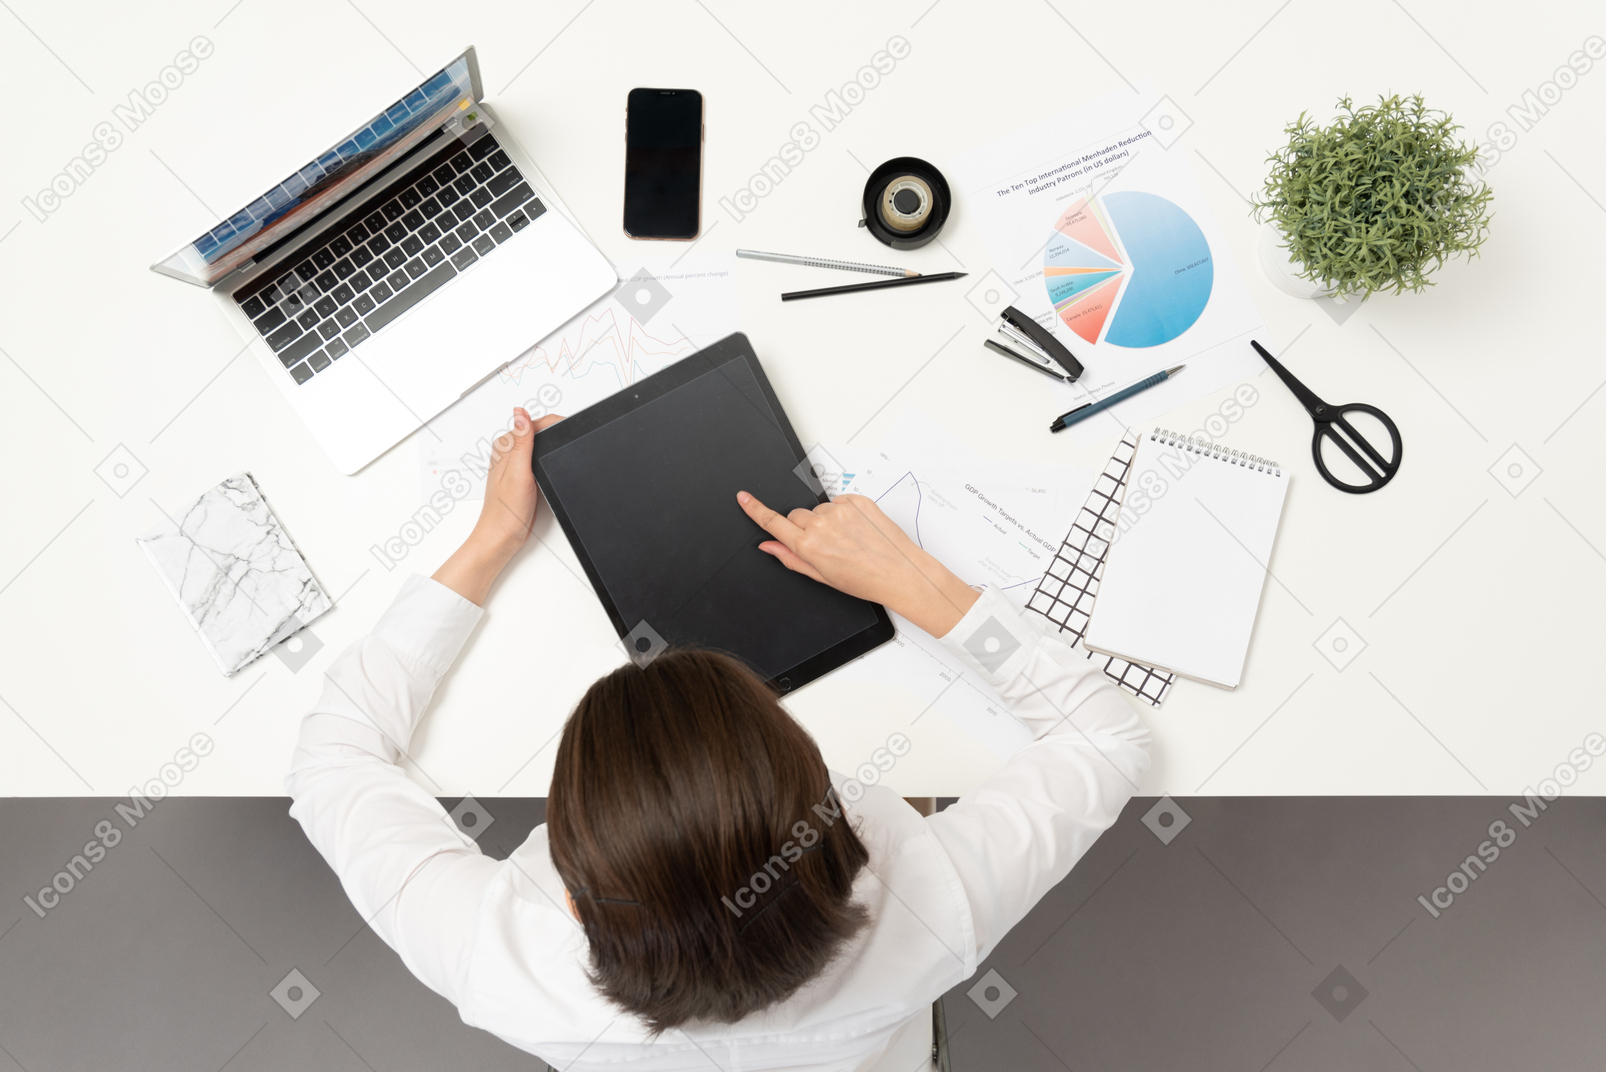 A female office worker at the table holding ipad